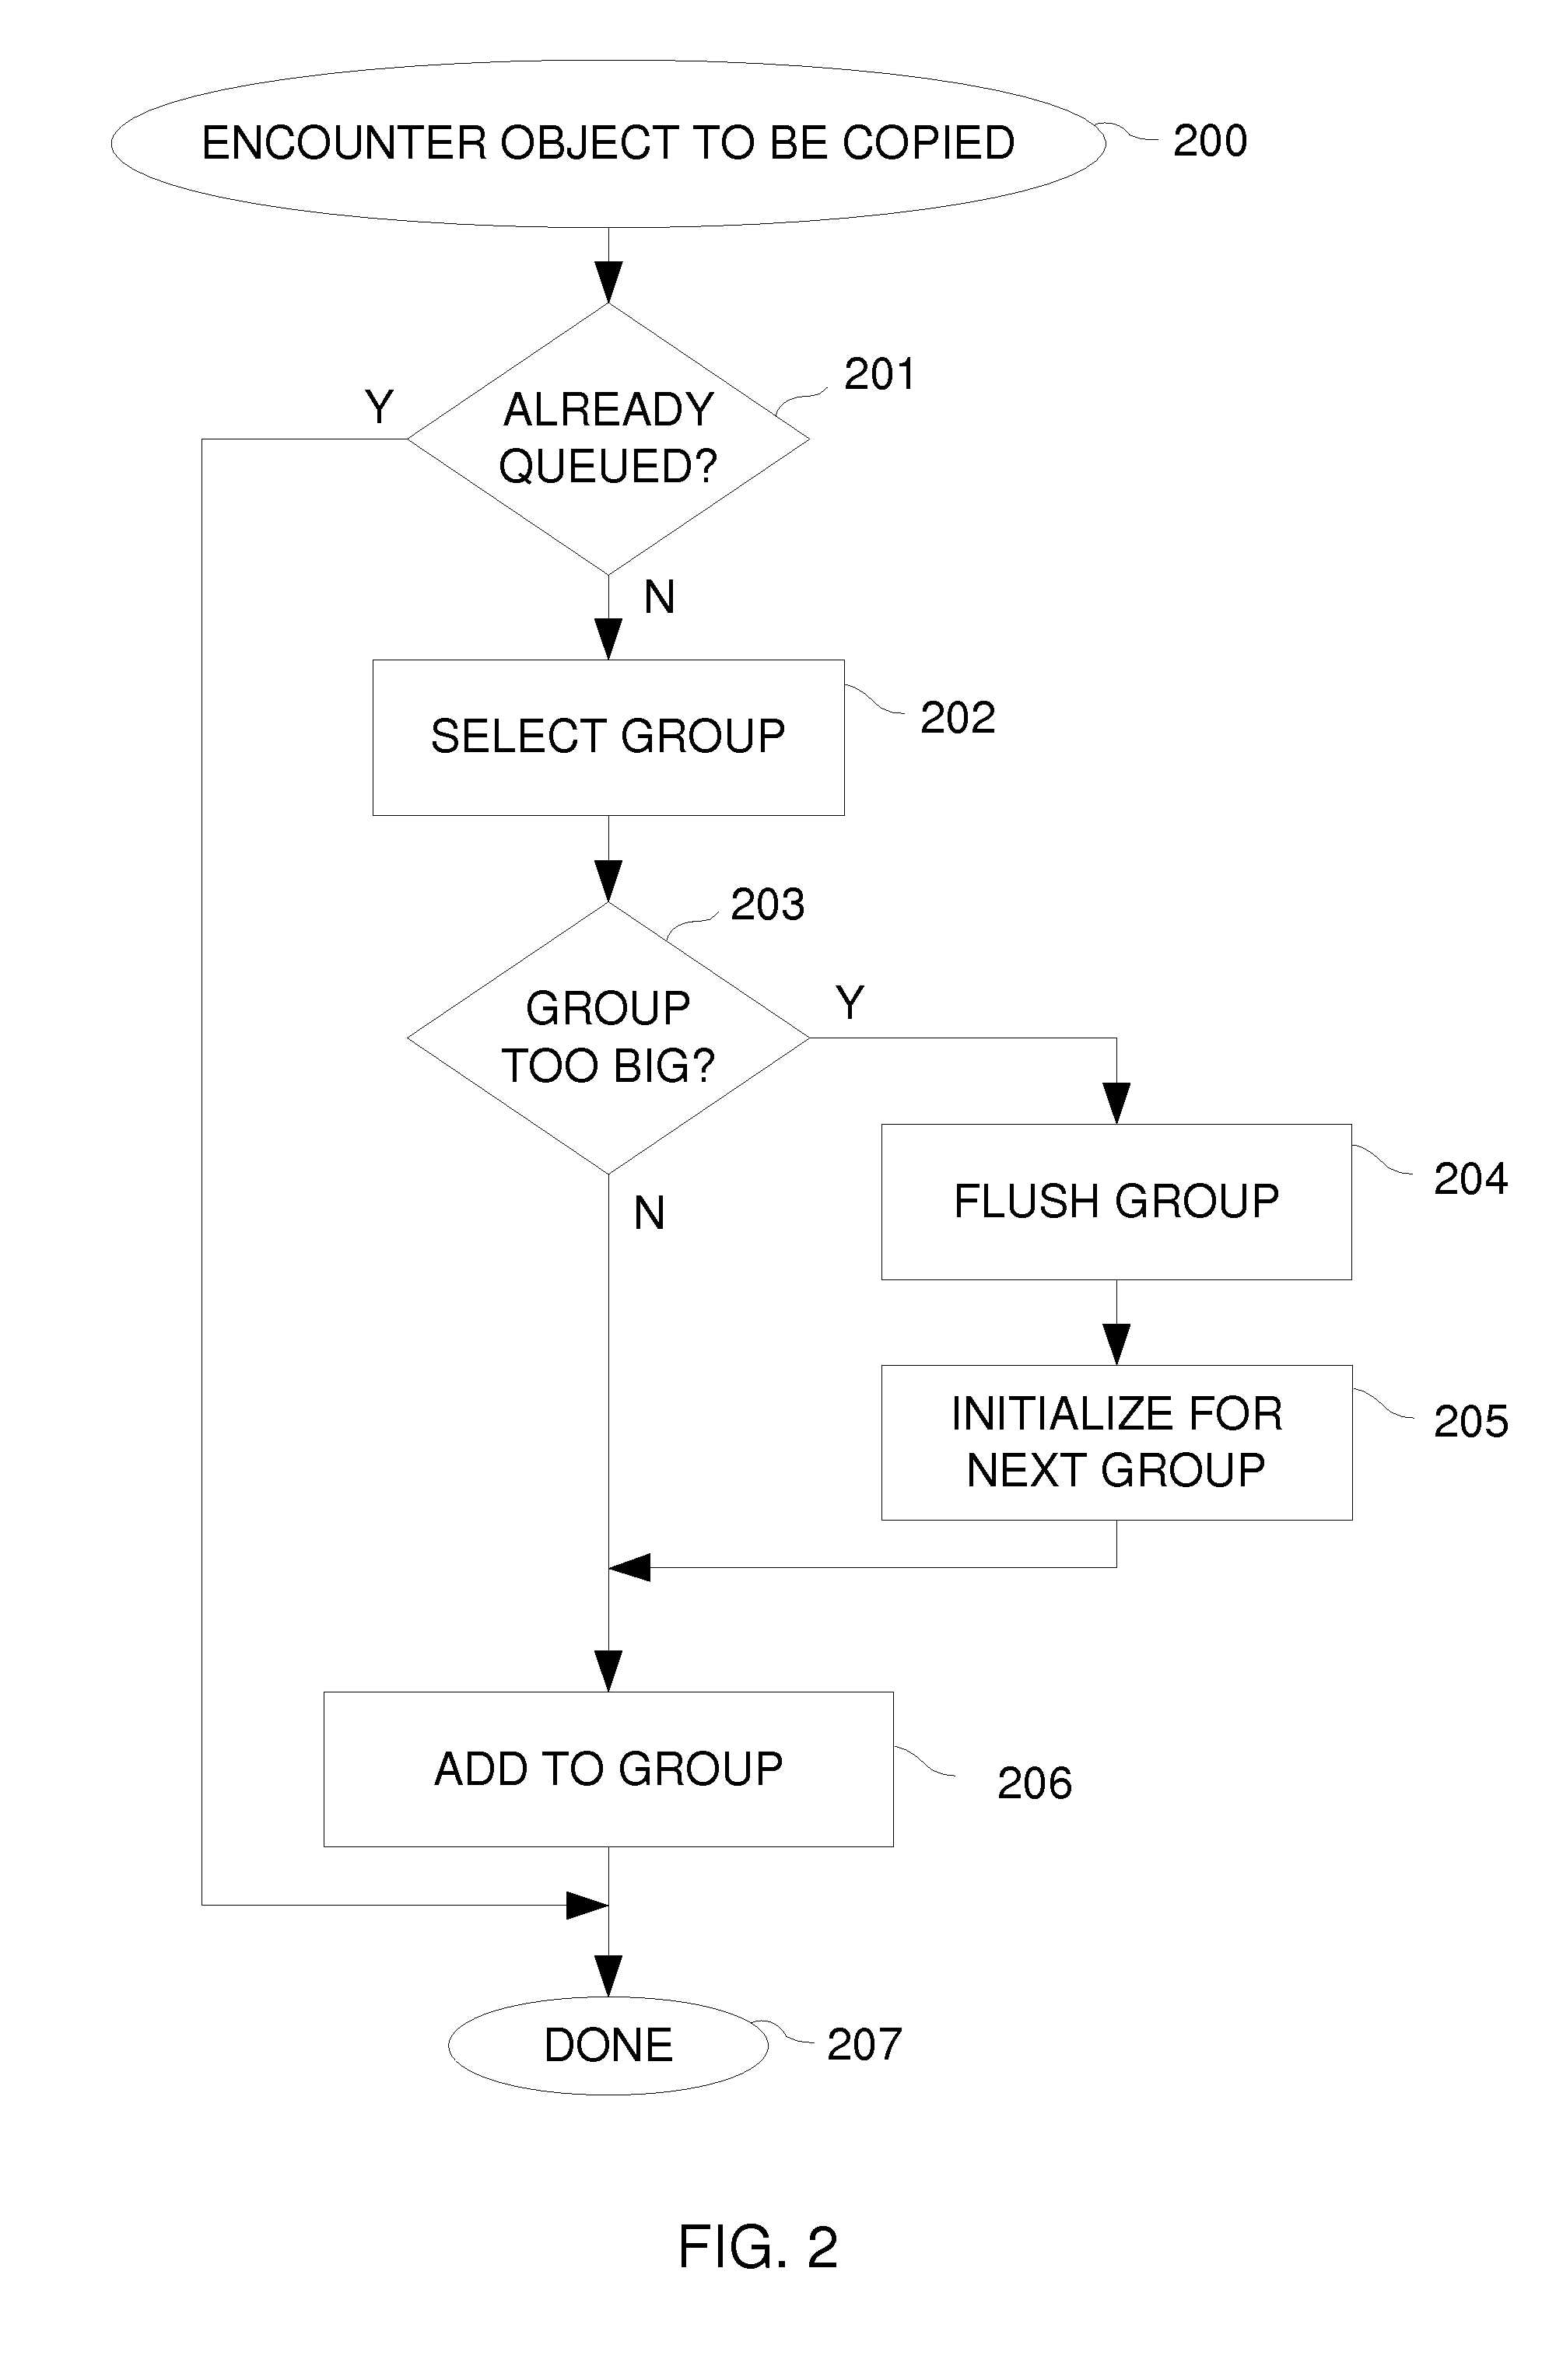 Grouped space allocation for copied objects